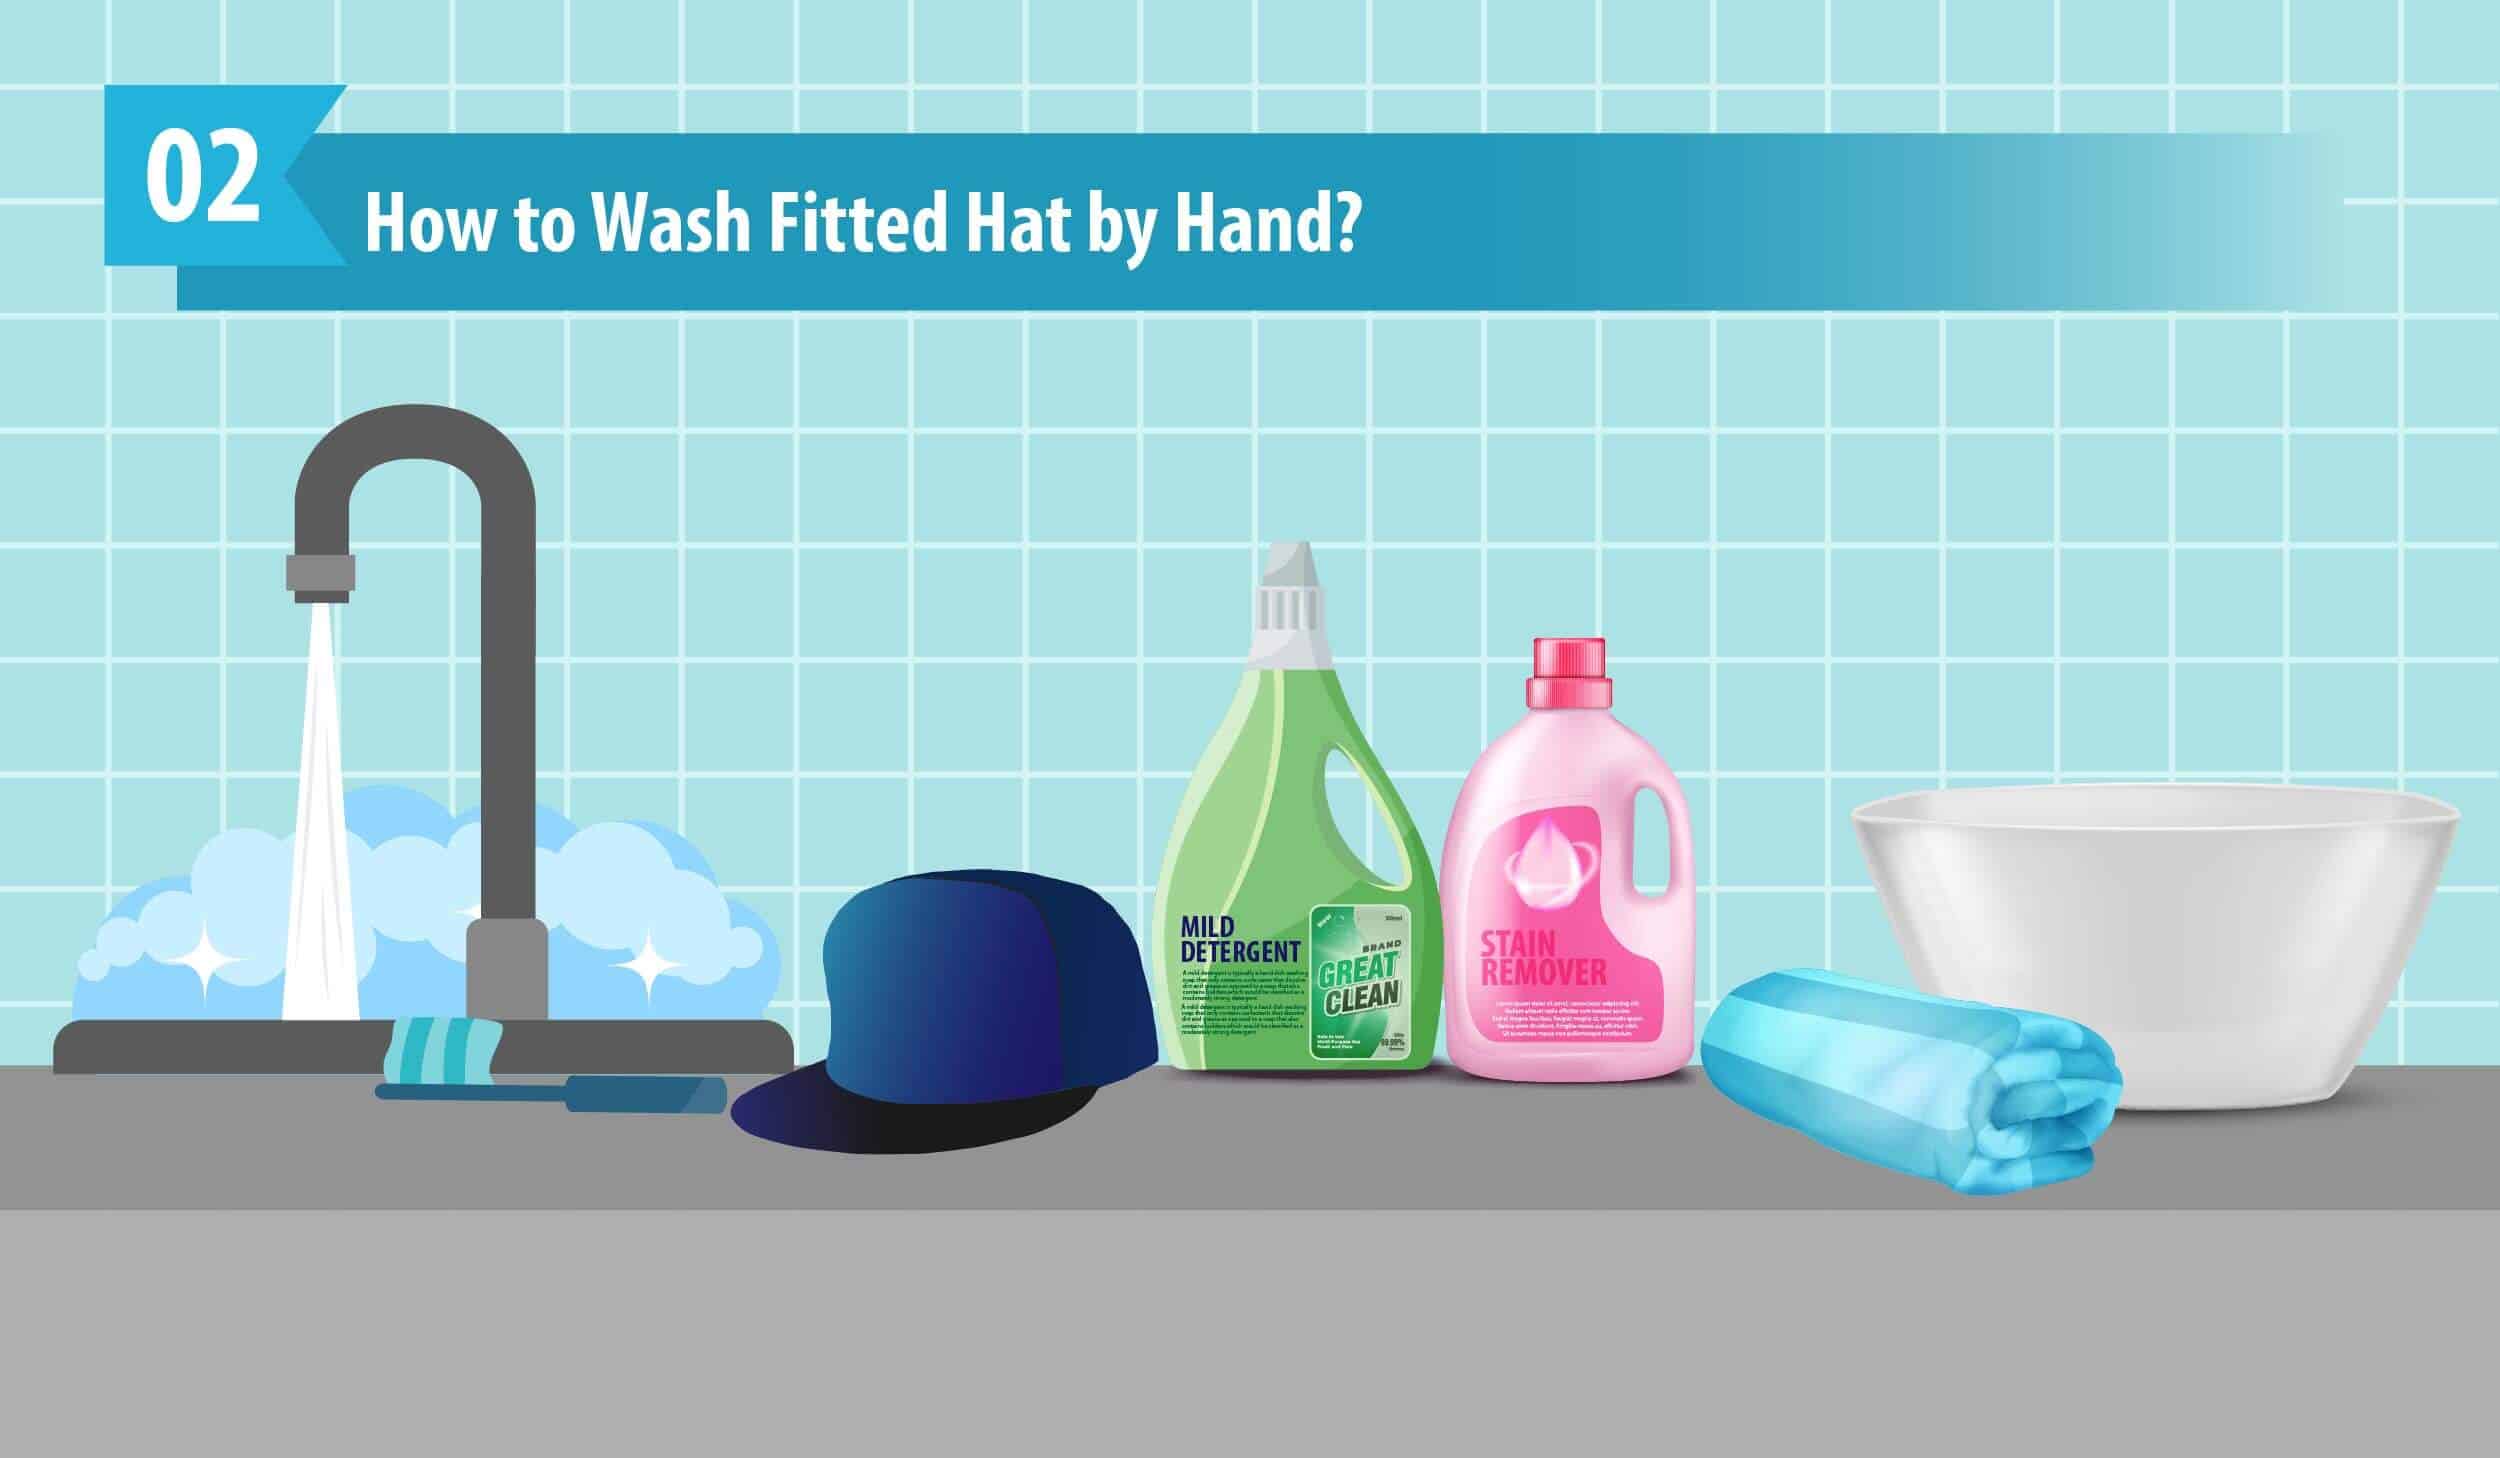 How to Wash Fitted Hat by Hand